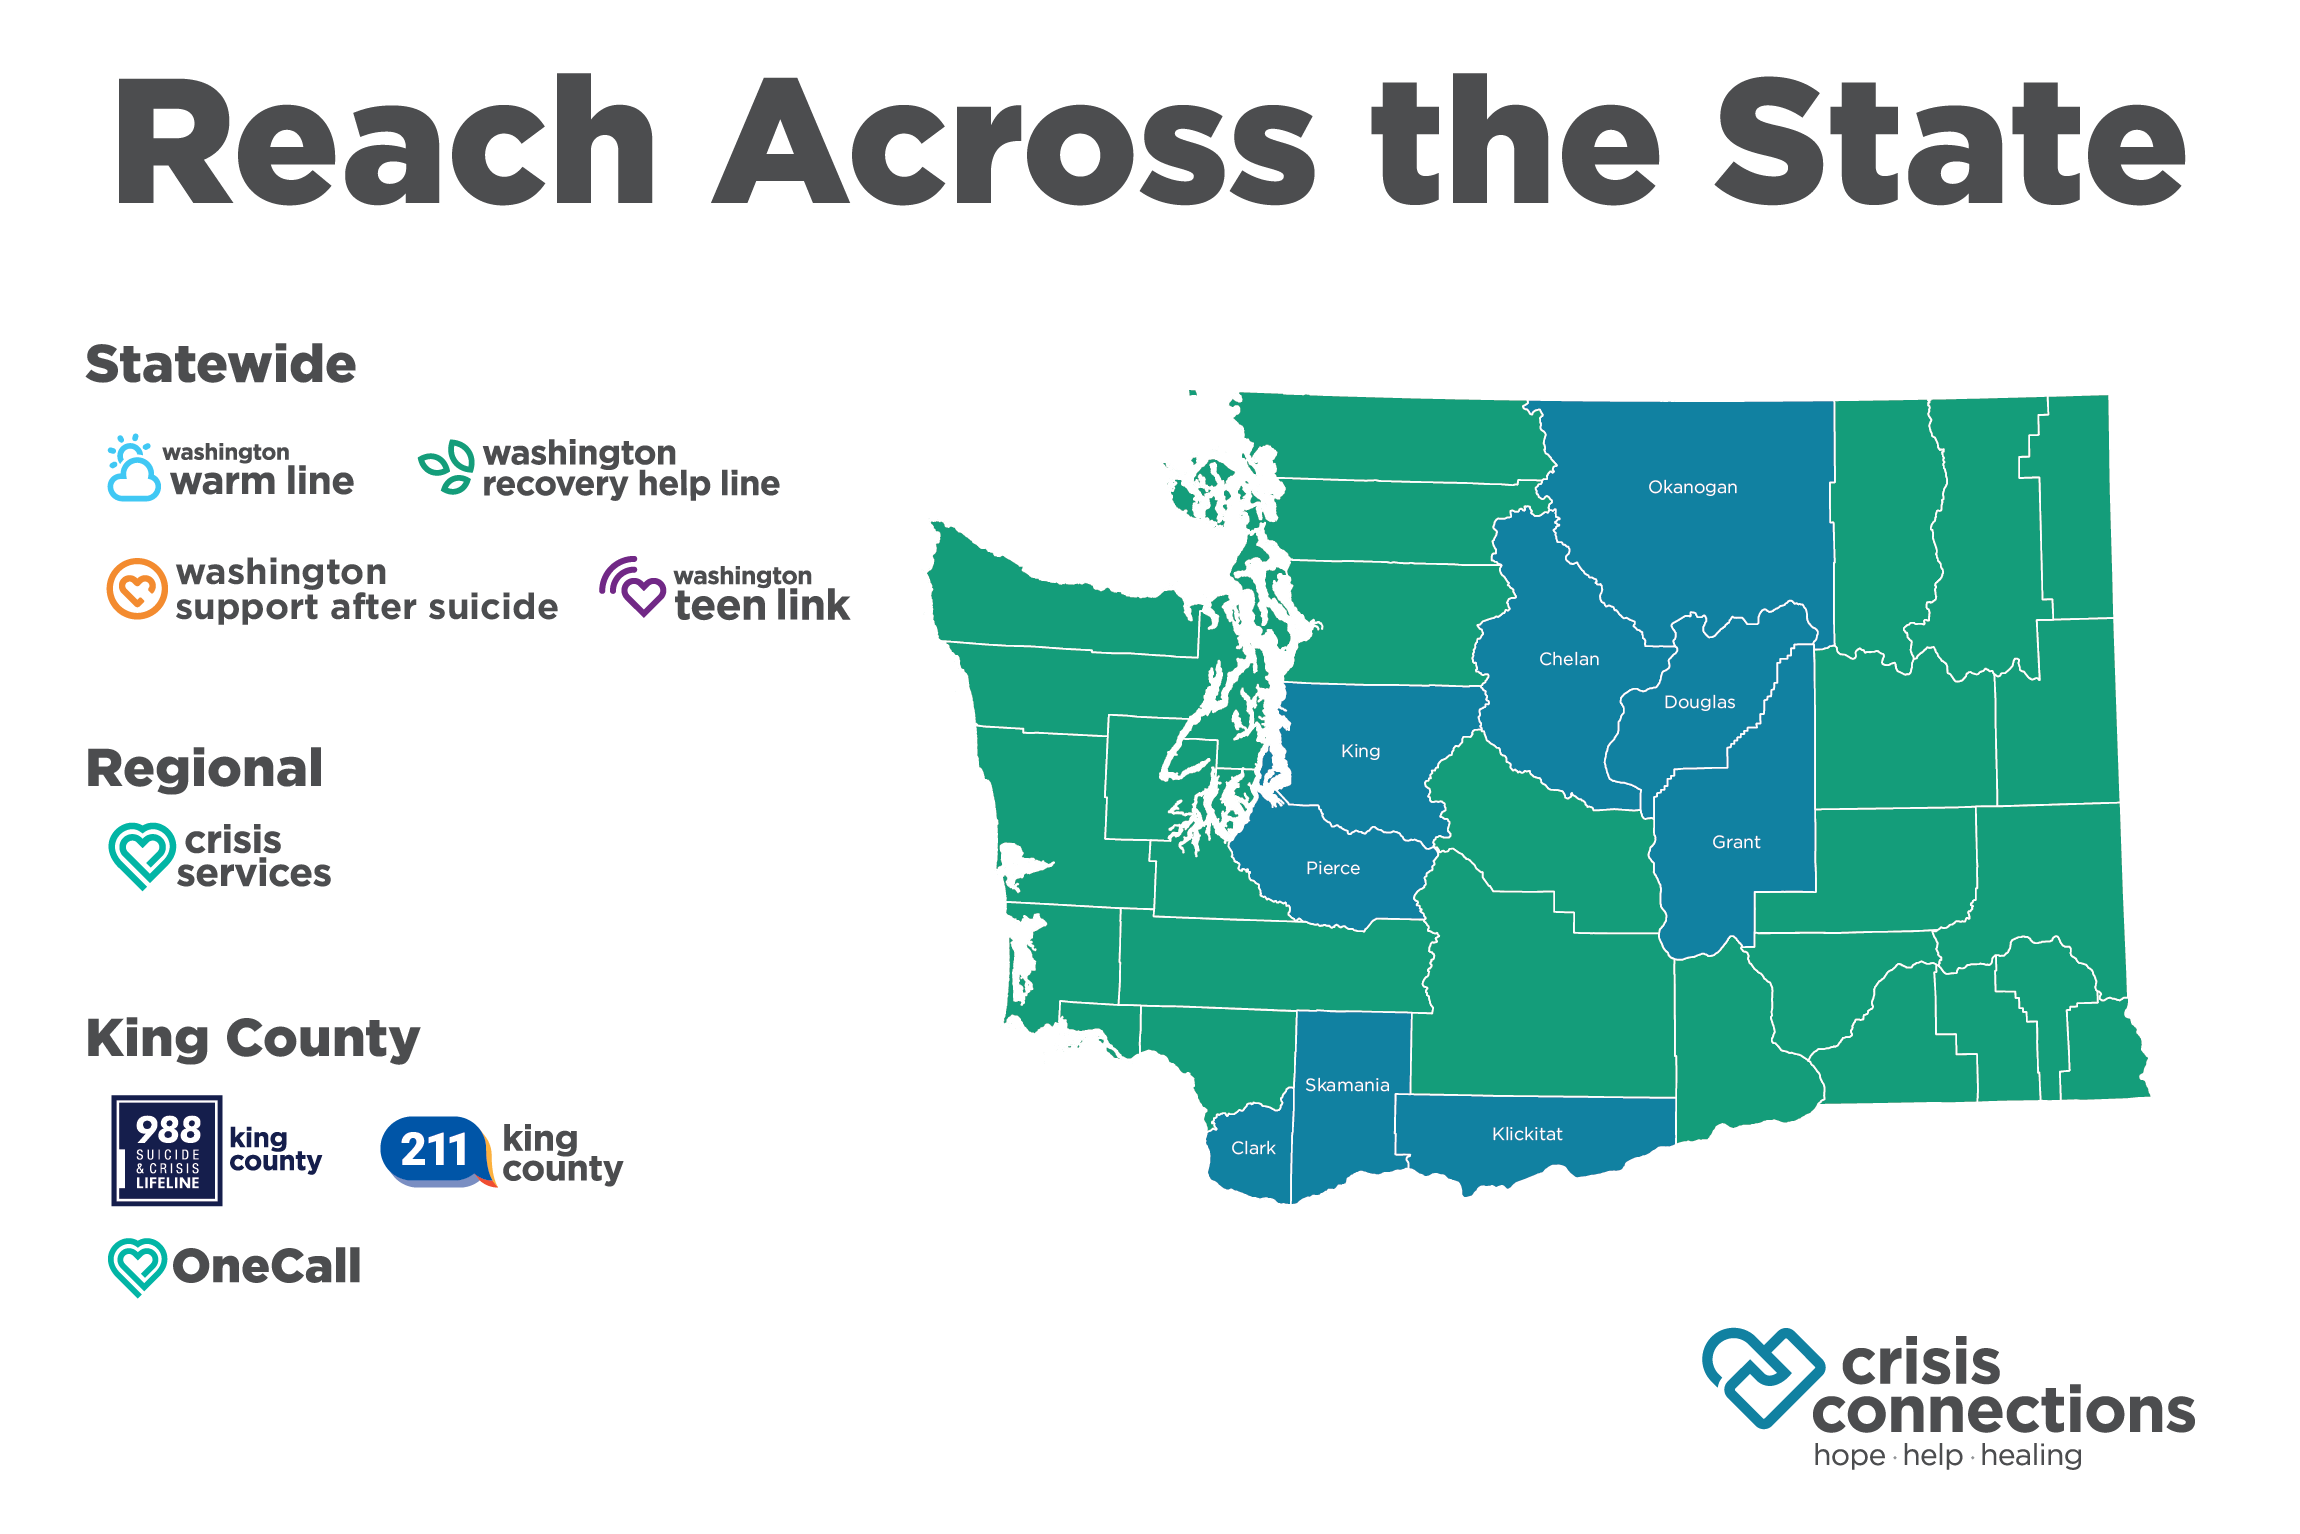 Reach Across the State map featuring the counties and regions served by Crisis Connections programs